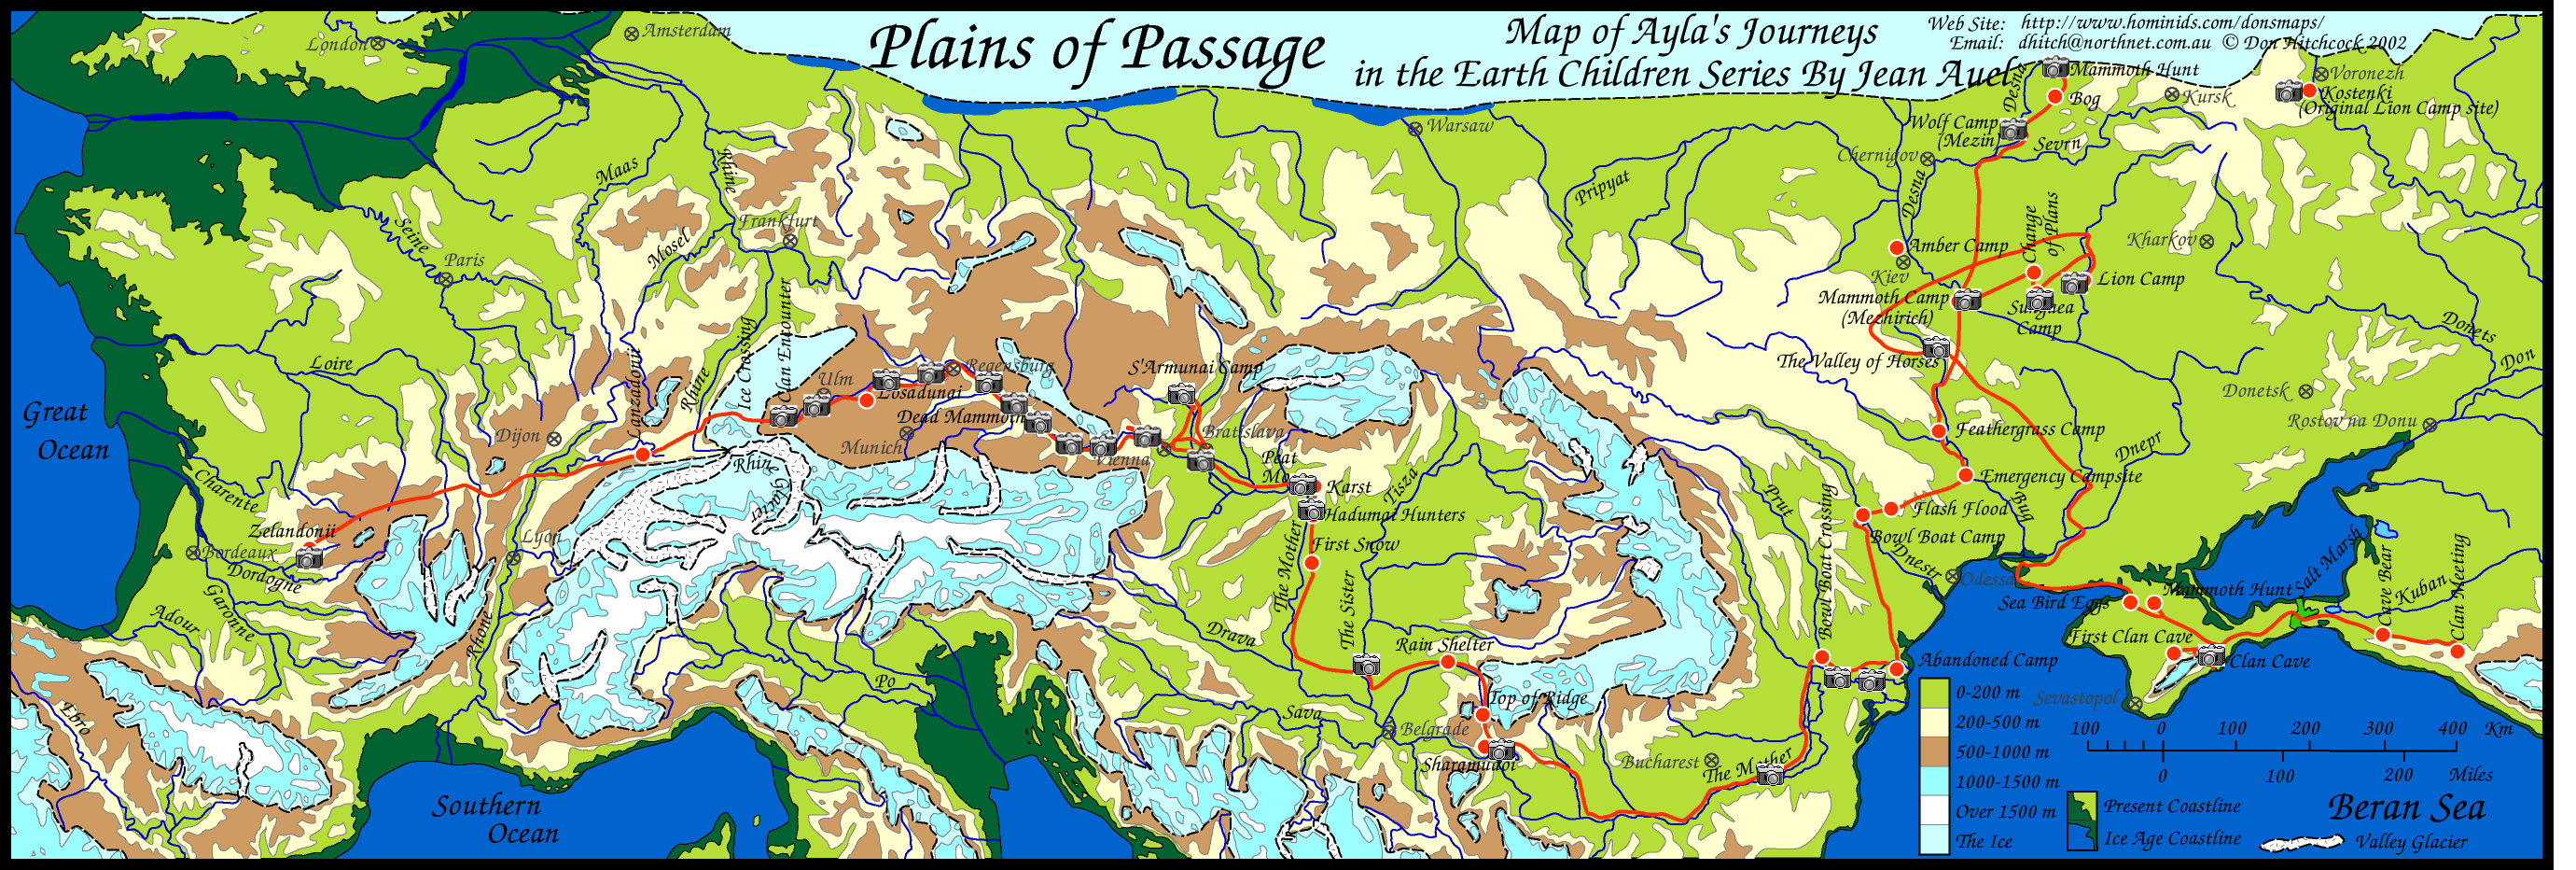 Map of The plains of passage travels